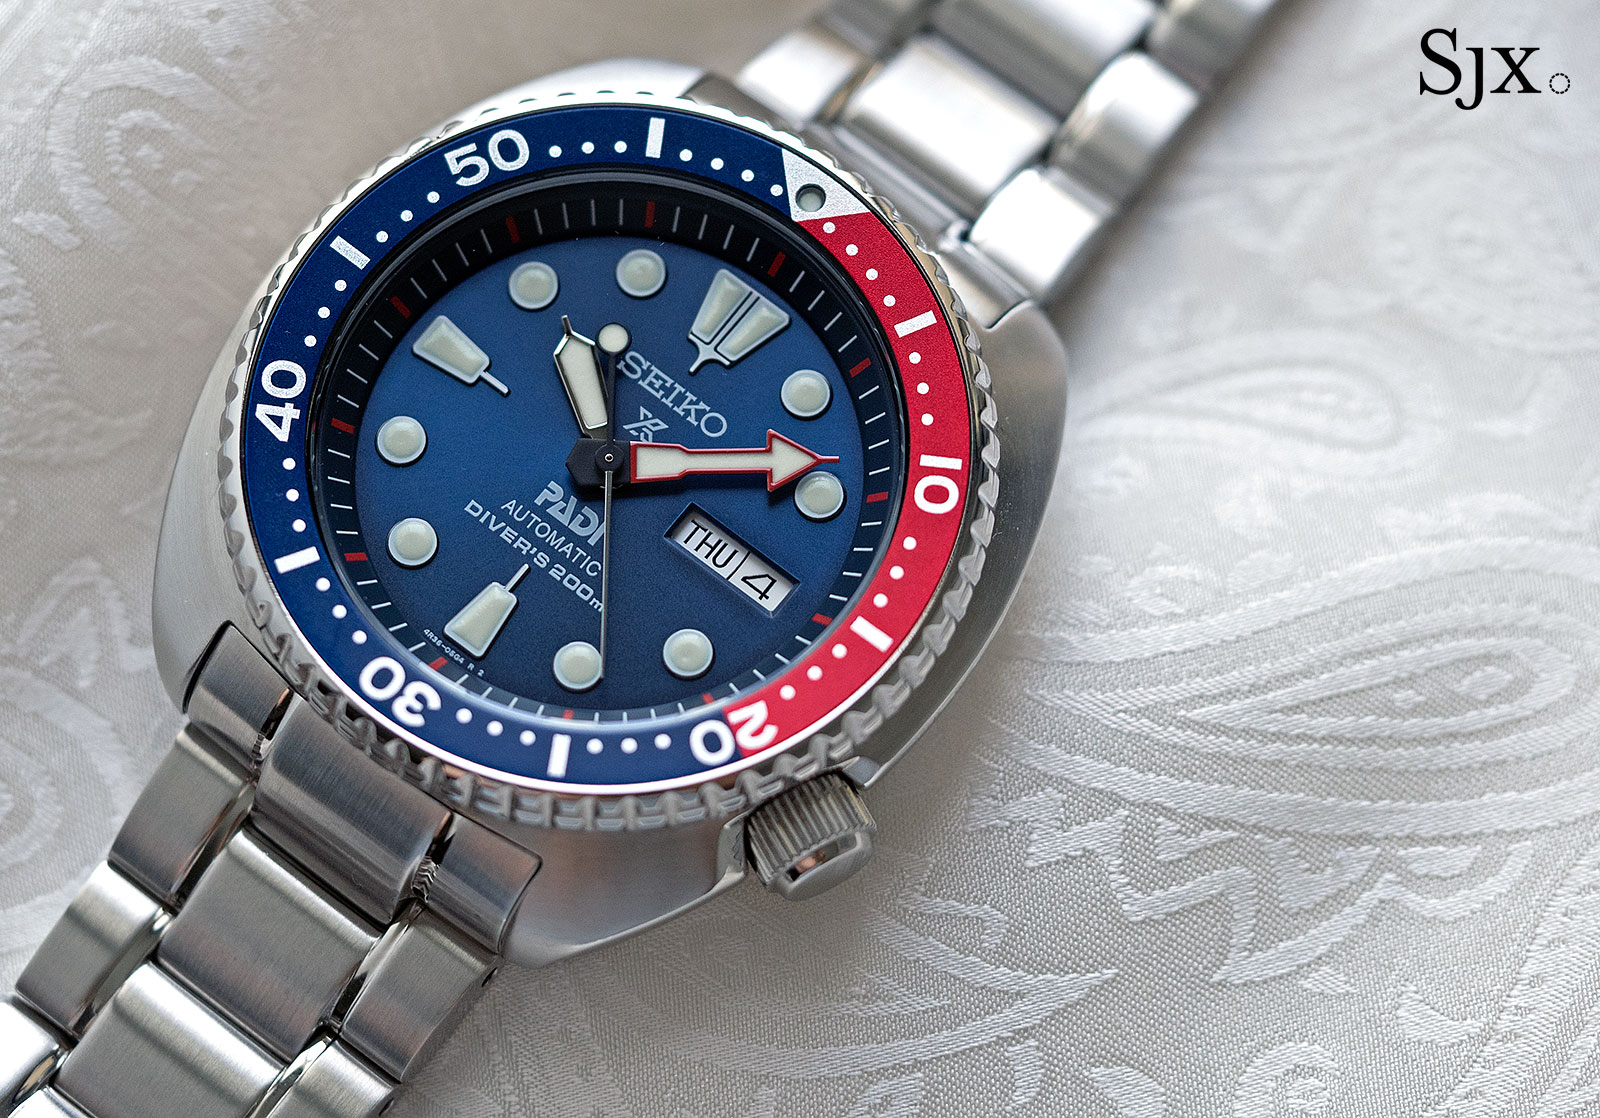 attent Staren uitdrukking Hands-On with the Seiko PADI Diver Automatic Ref. SRPA21-K1 | SJX Watches